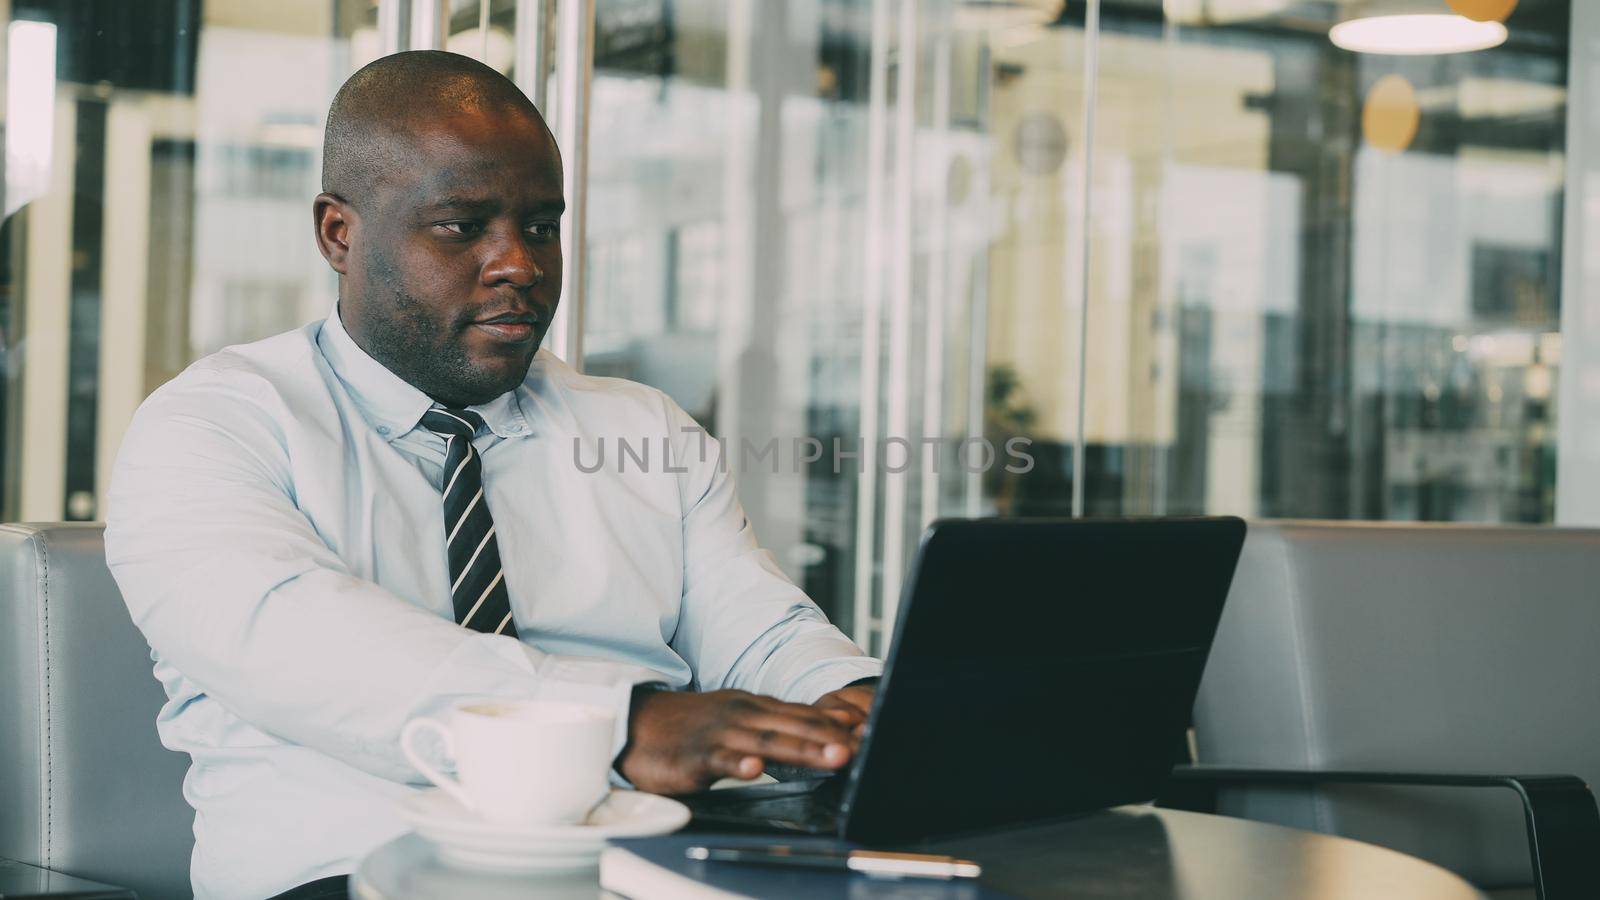 Portrait of African American businessman in formal clothes thinking, printing and working on his laptop in glassy cafe during lunch break. Coffee is on his table.